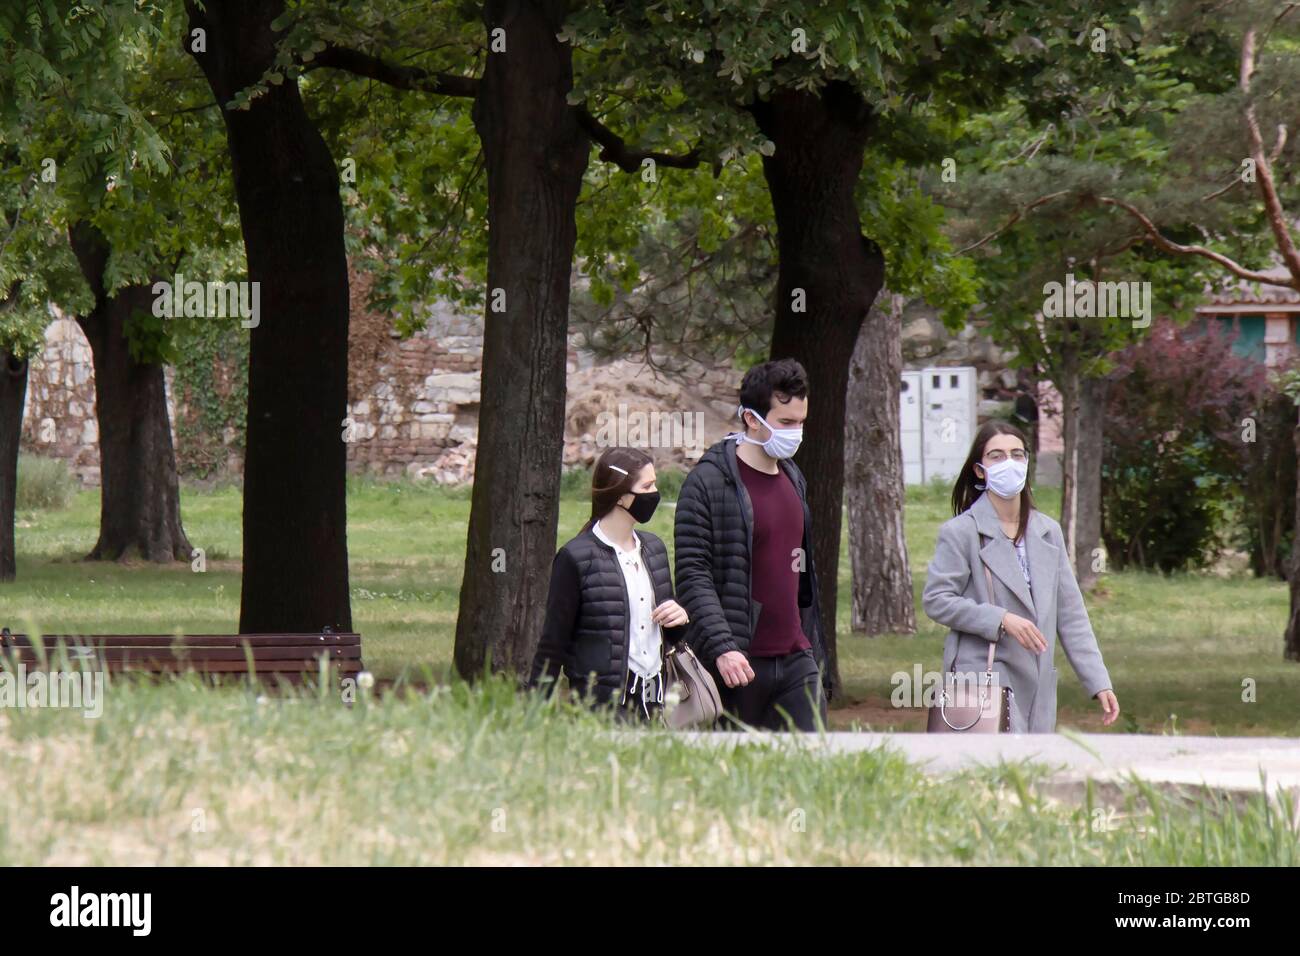 Belgrade, Serbia - May 12, 2020: Young people wearing face masks while  walking in nature, in city public park Kalemegdan Stock Photo - Alamy